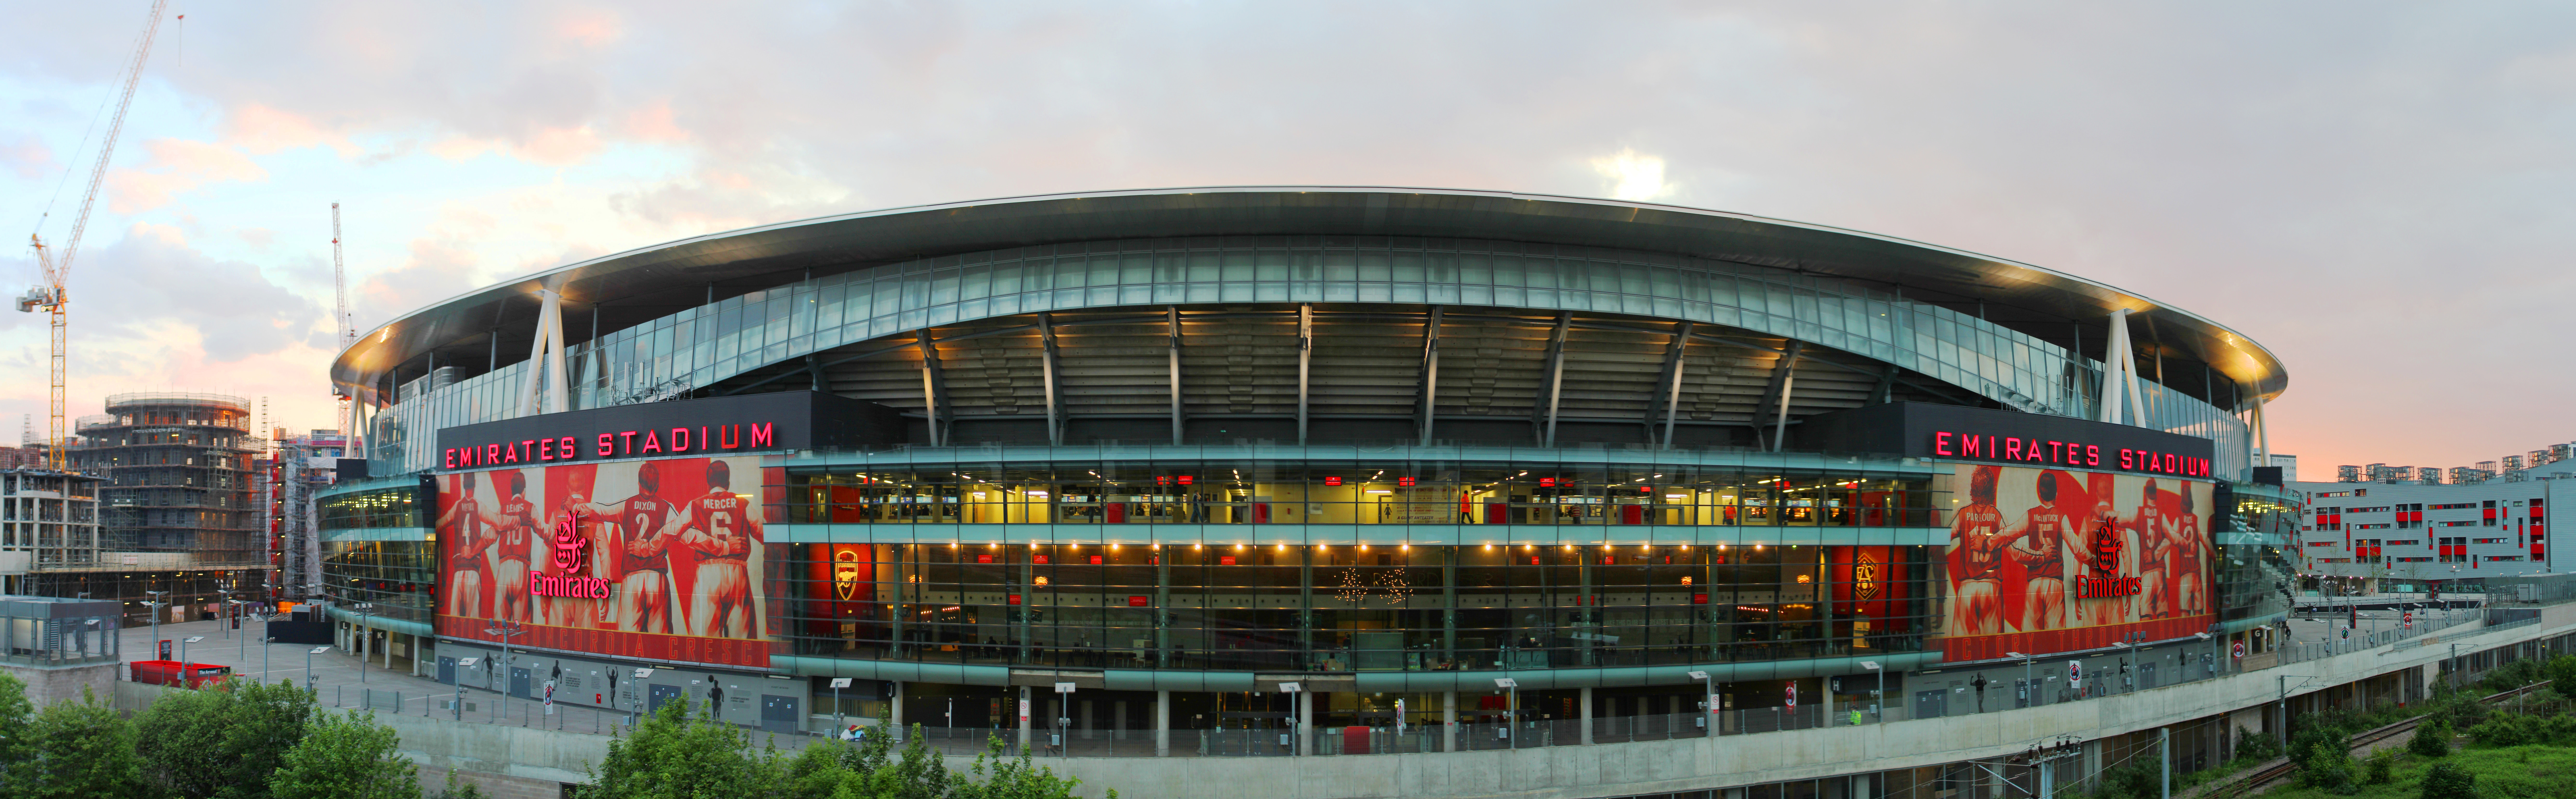 Arsenal Emirates Stadium Wallpaper For Twitter Full HD Pictures